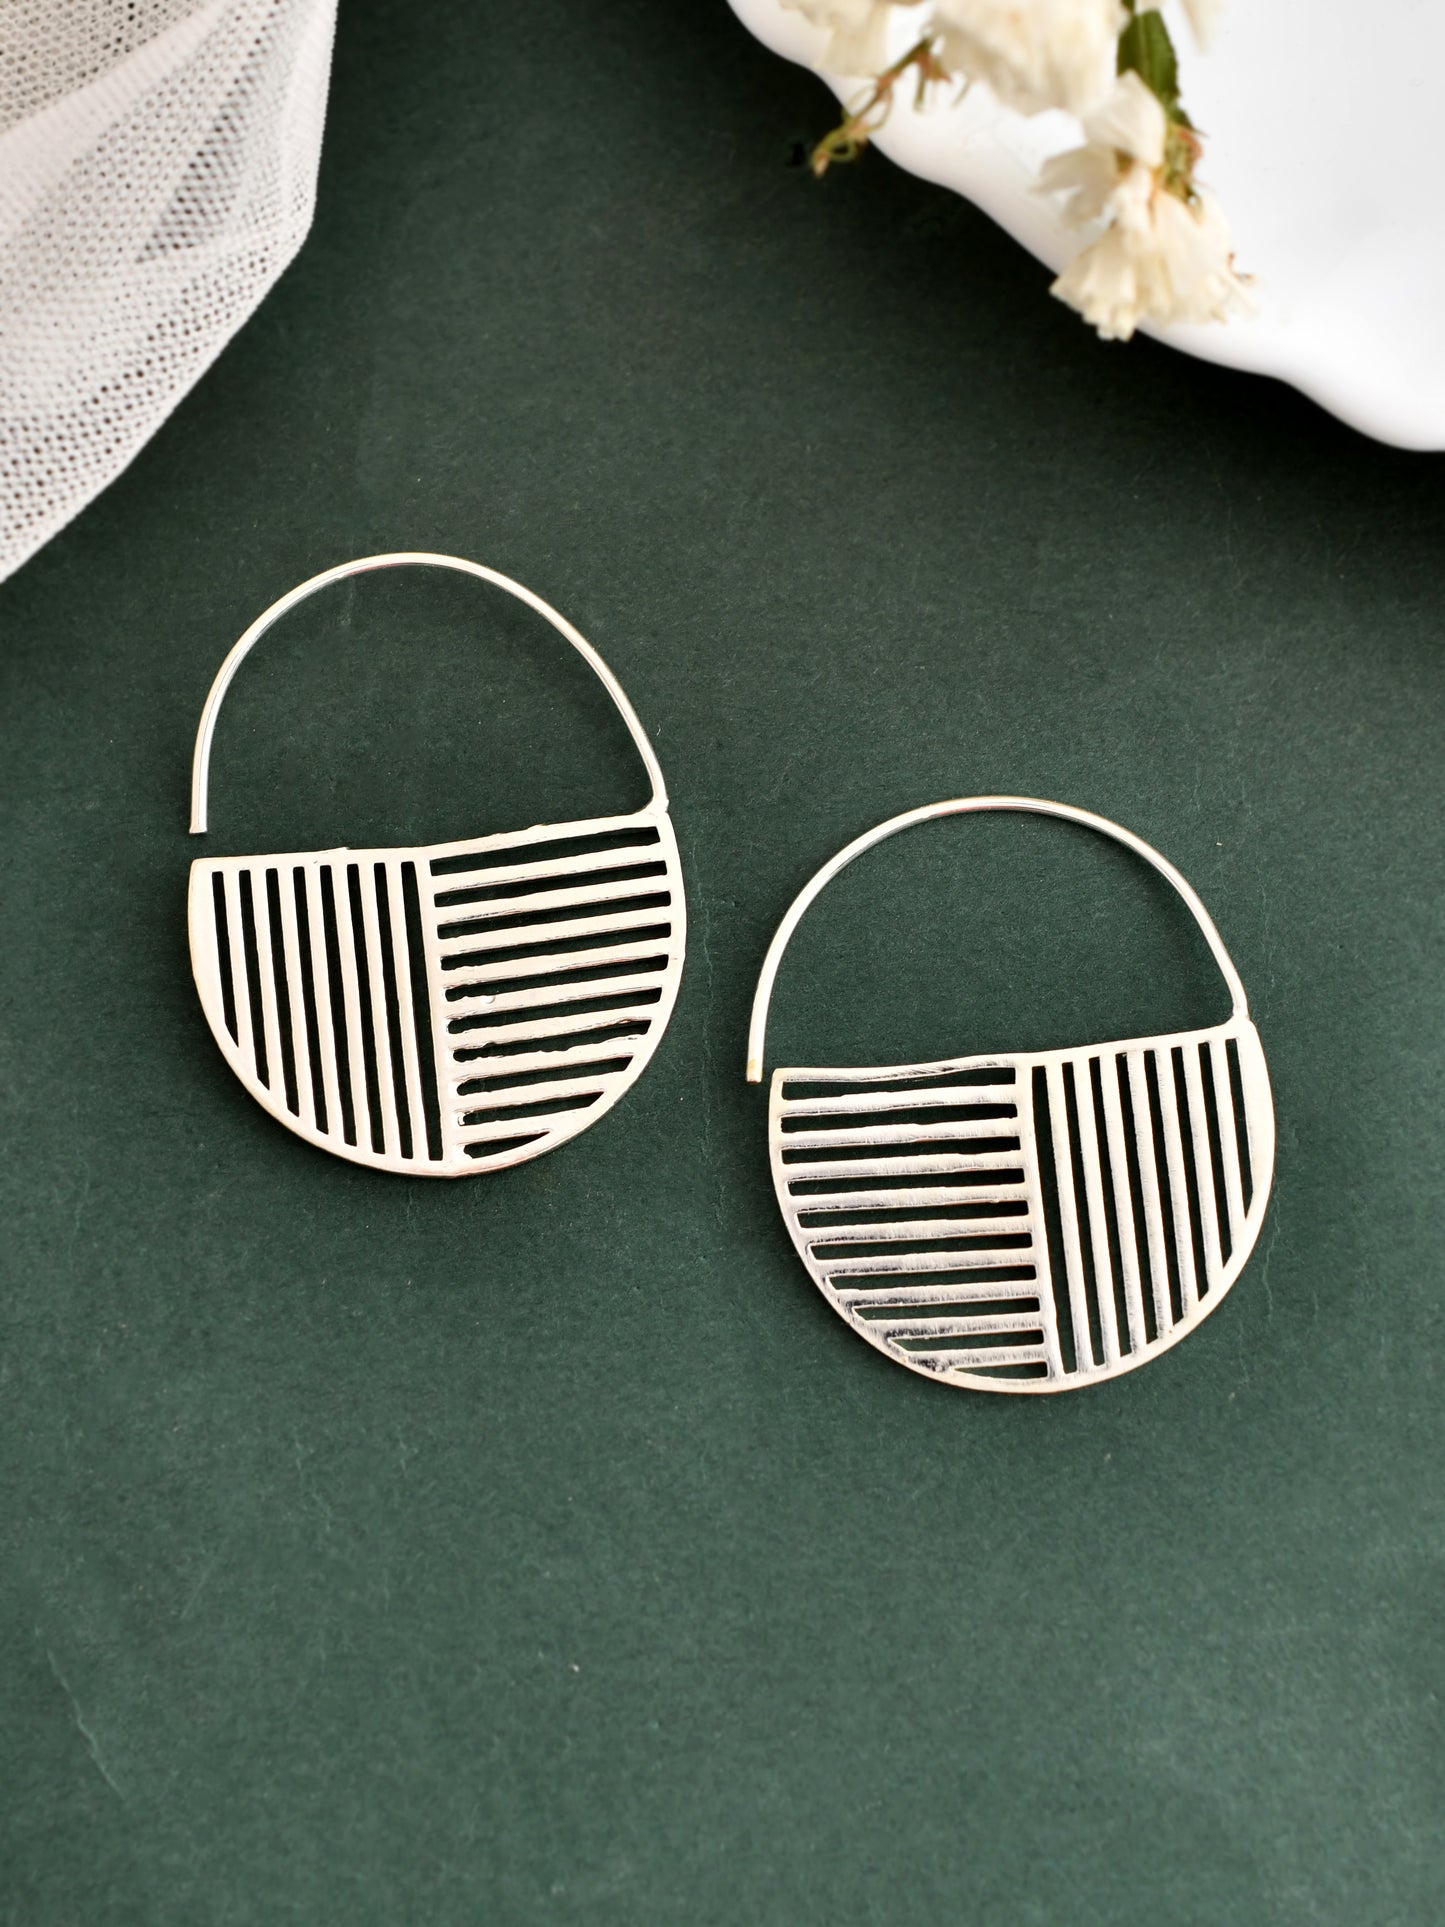 Elegant Silver Hoop Earrings with Unique Striped Design